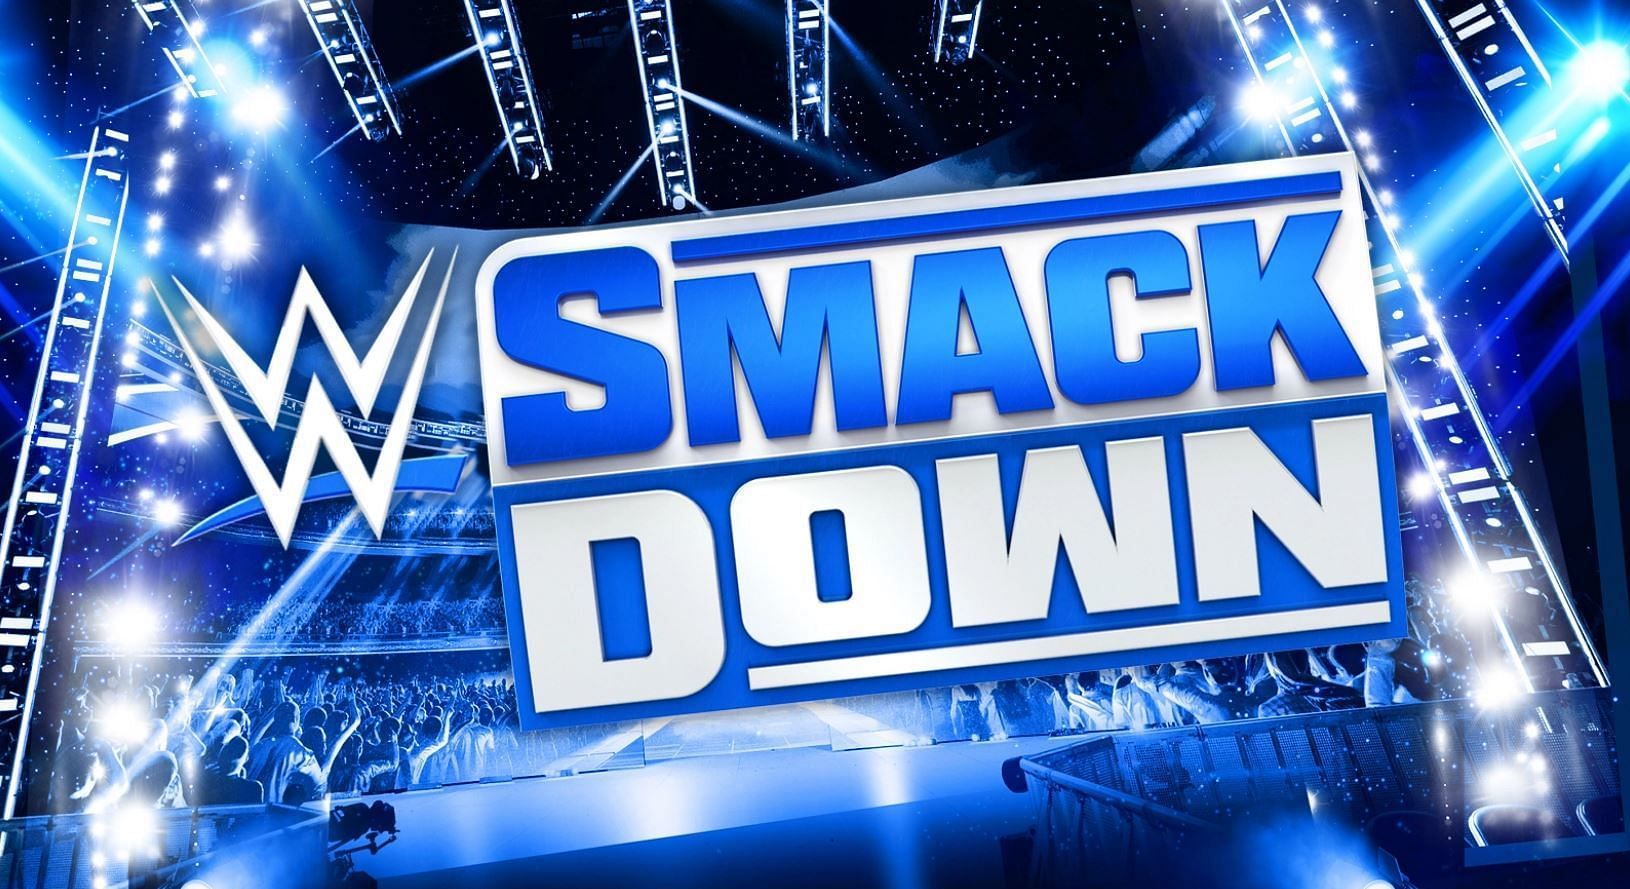 The graphics for this SmackDown match was botched